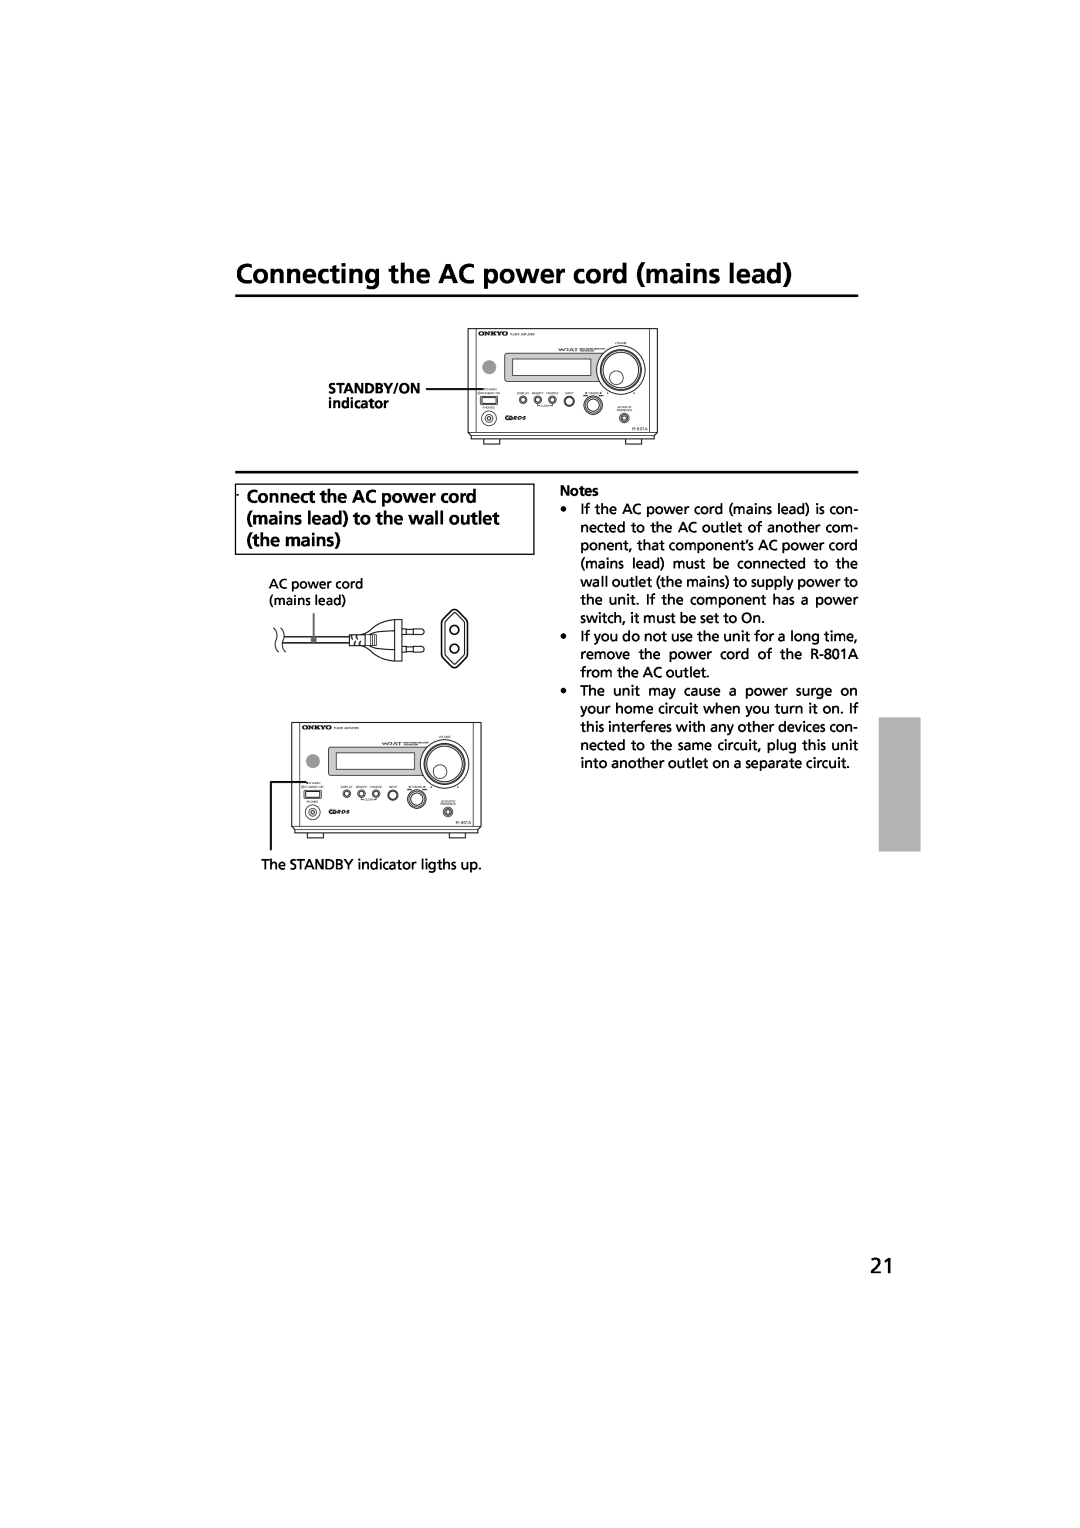 Onkyo R-801A instruction manual Connecting the AC power cord mains lead, STANDBY/ON indicator 